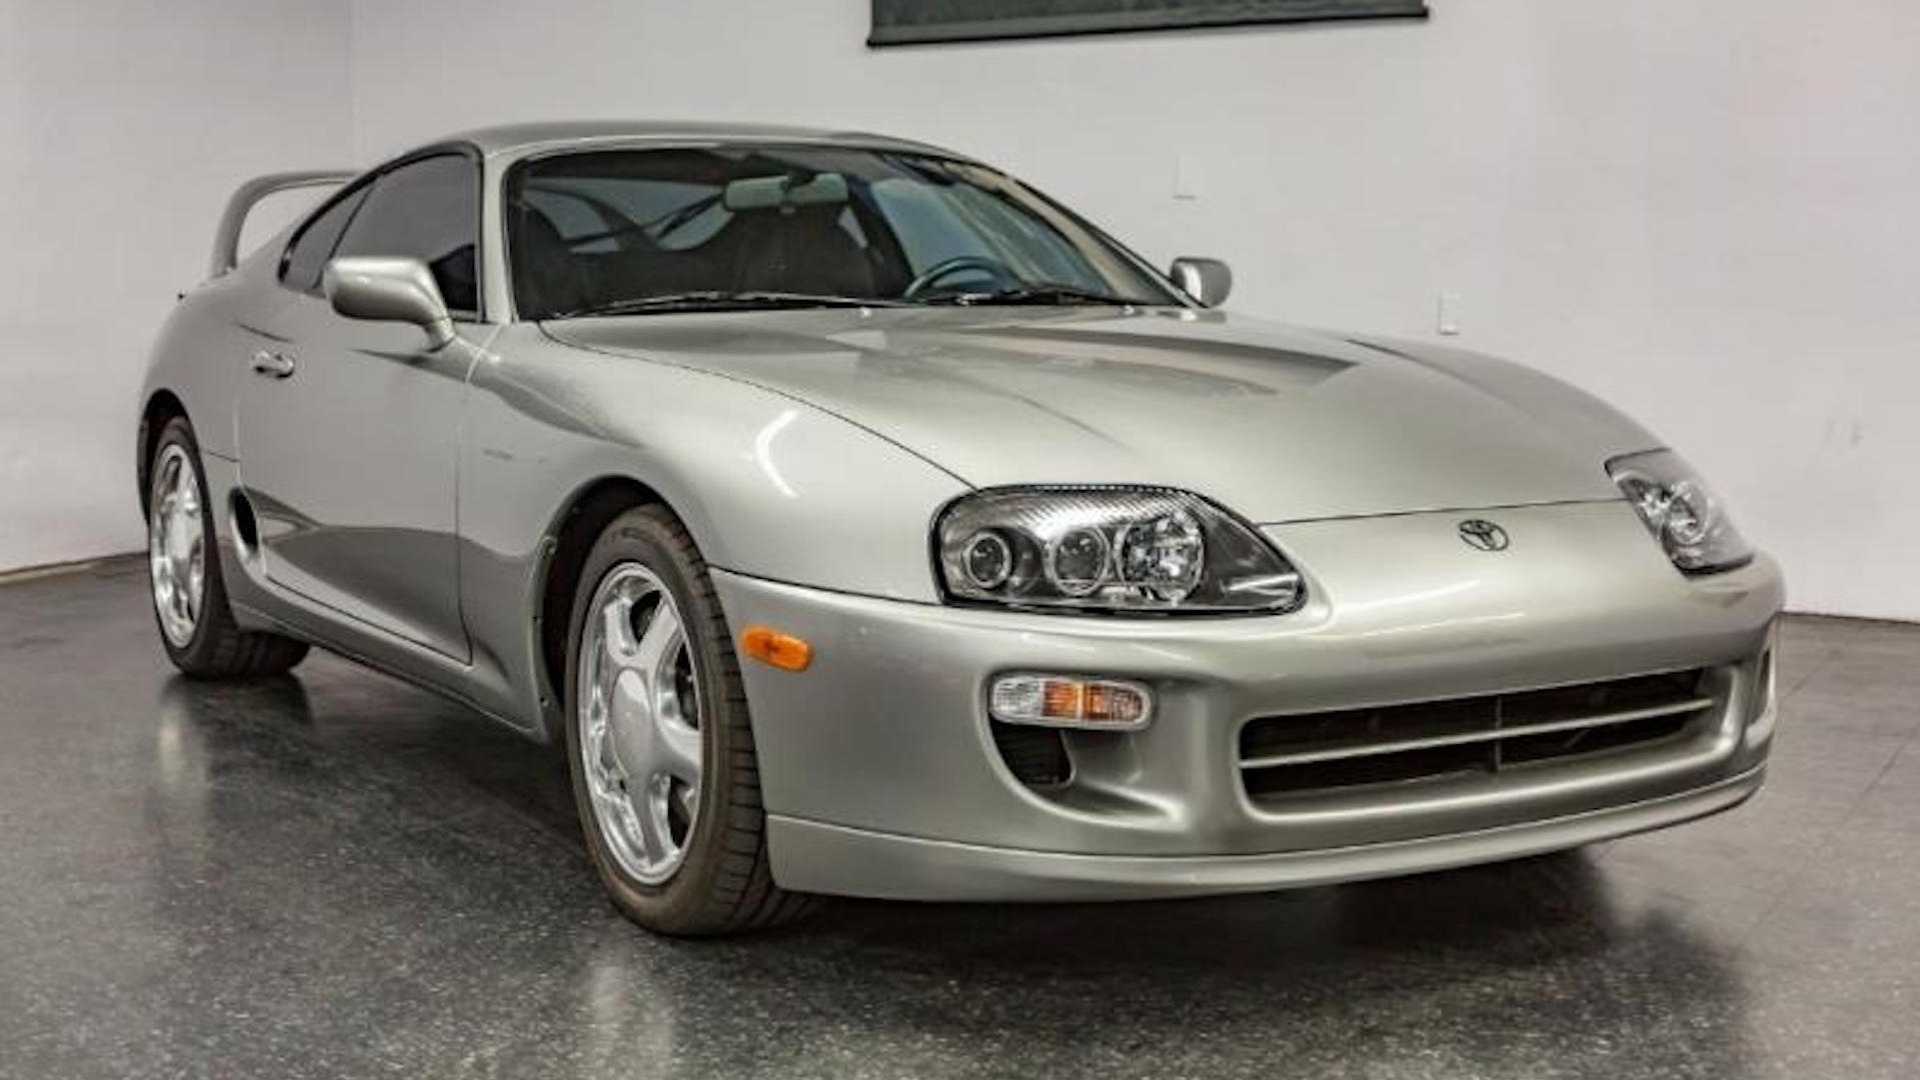 Would You Pay For A Mint Condition Toyota Supra